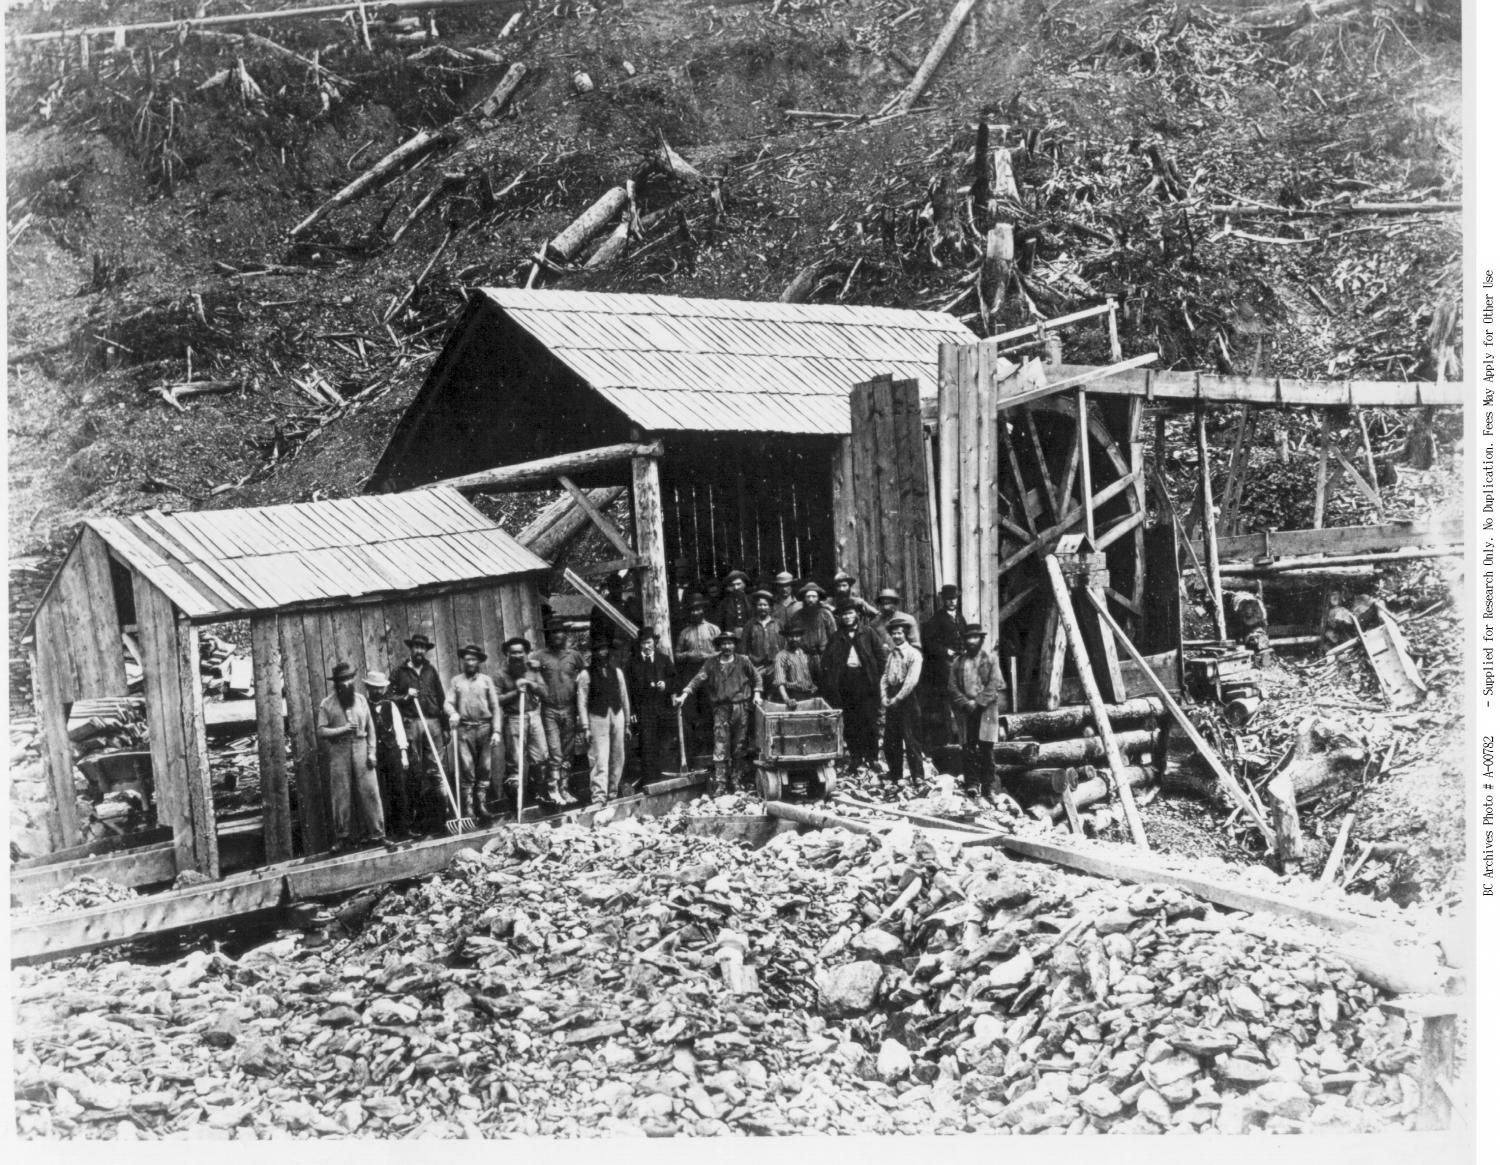 The Aurora gold mining claim on Williams Creek; wash up for that day 485 ozs [ounces] gold. June 15th 1867.